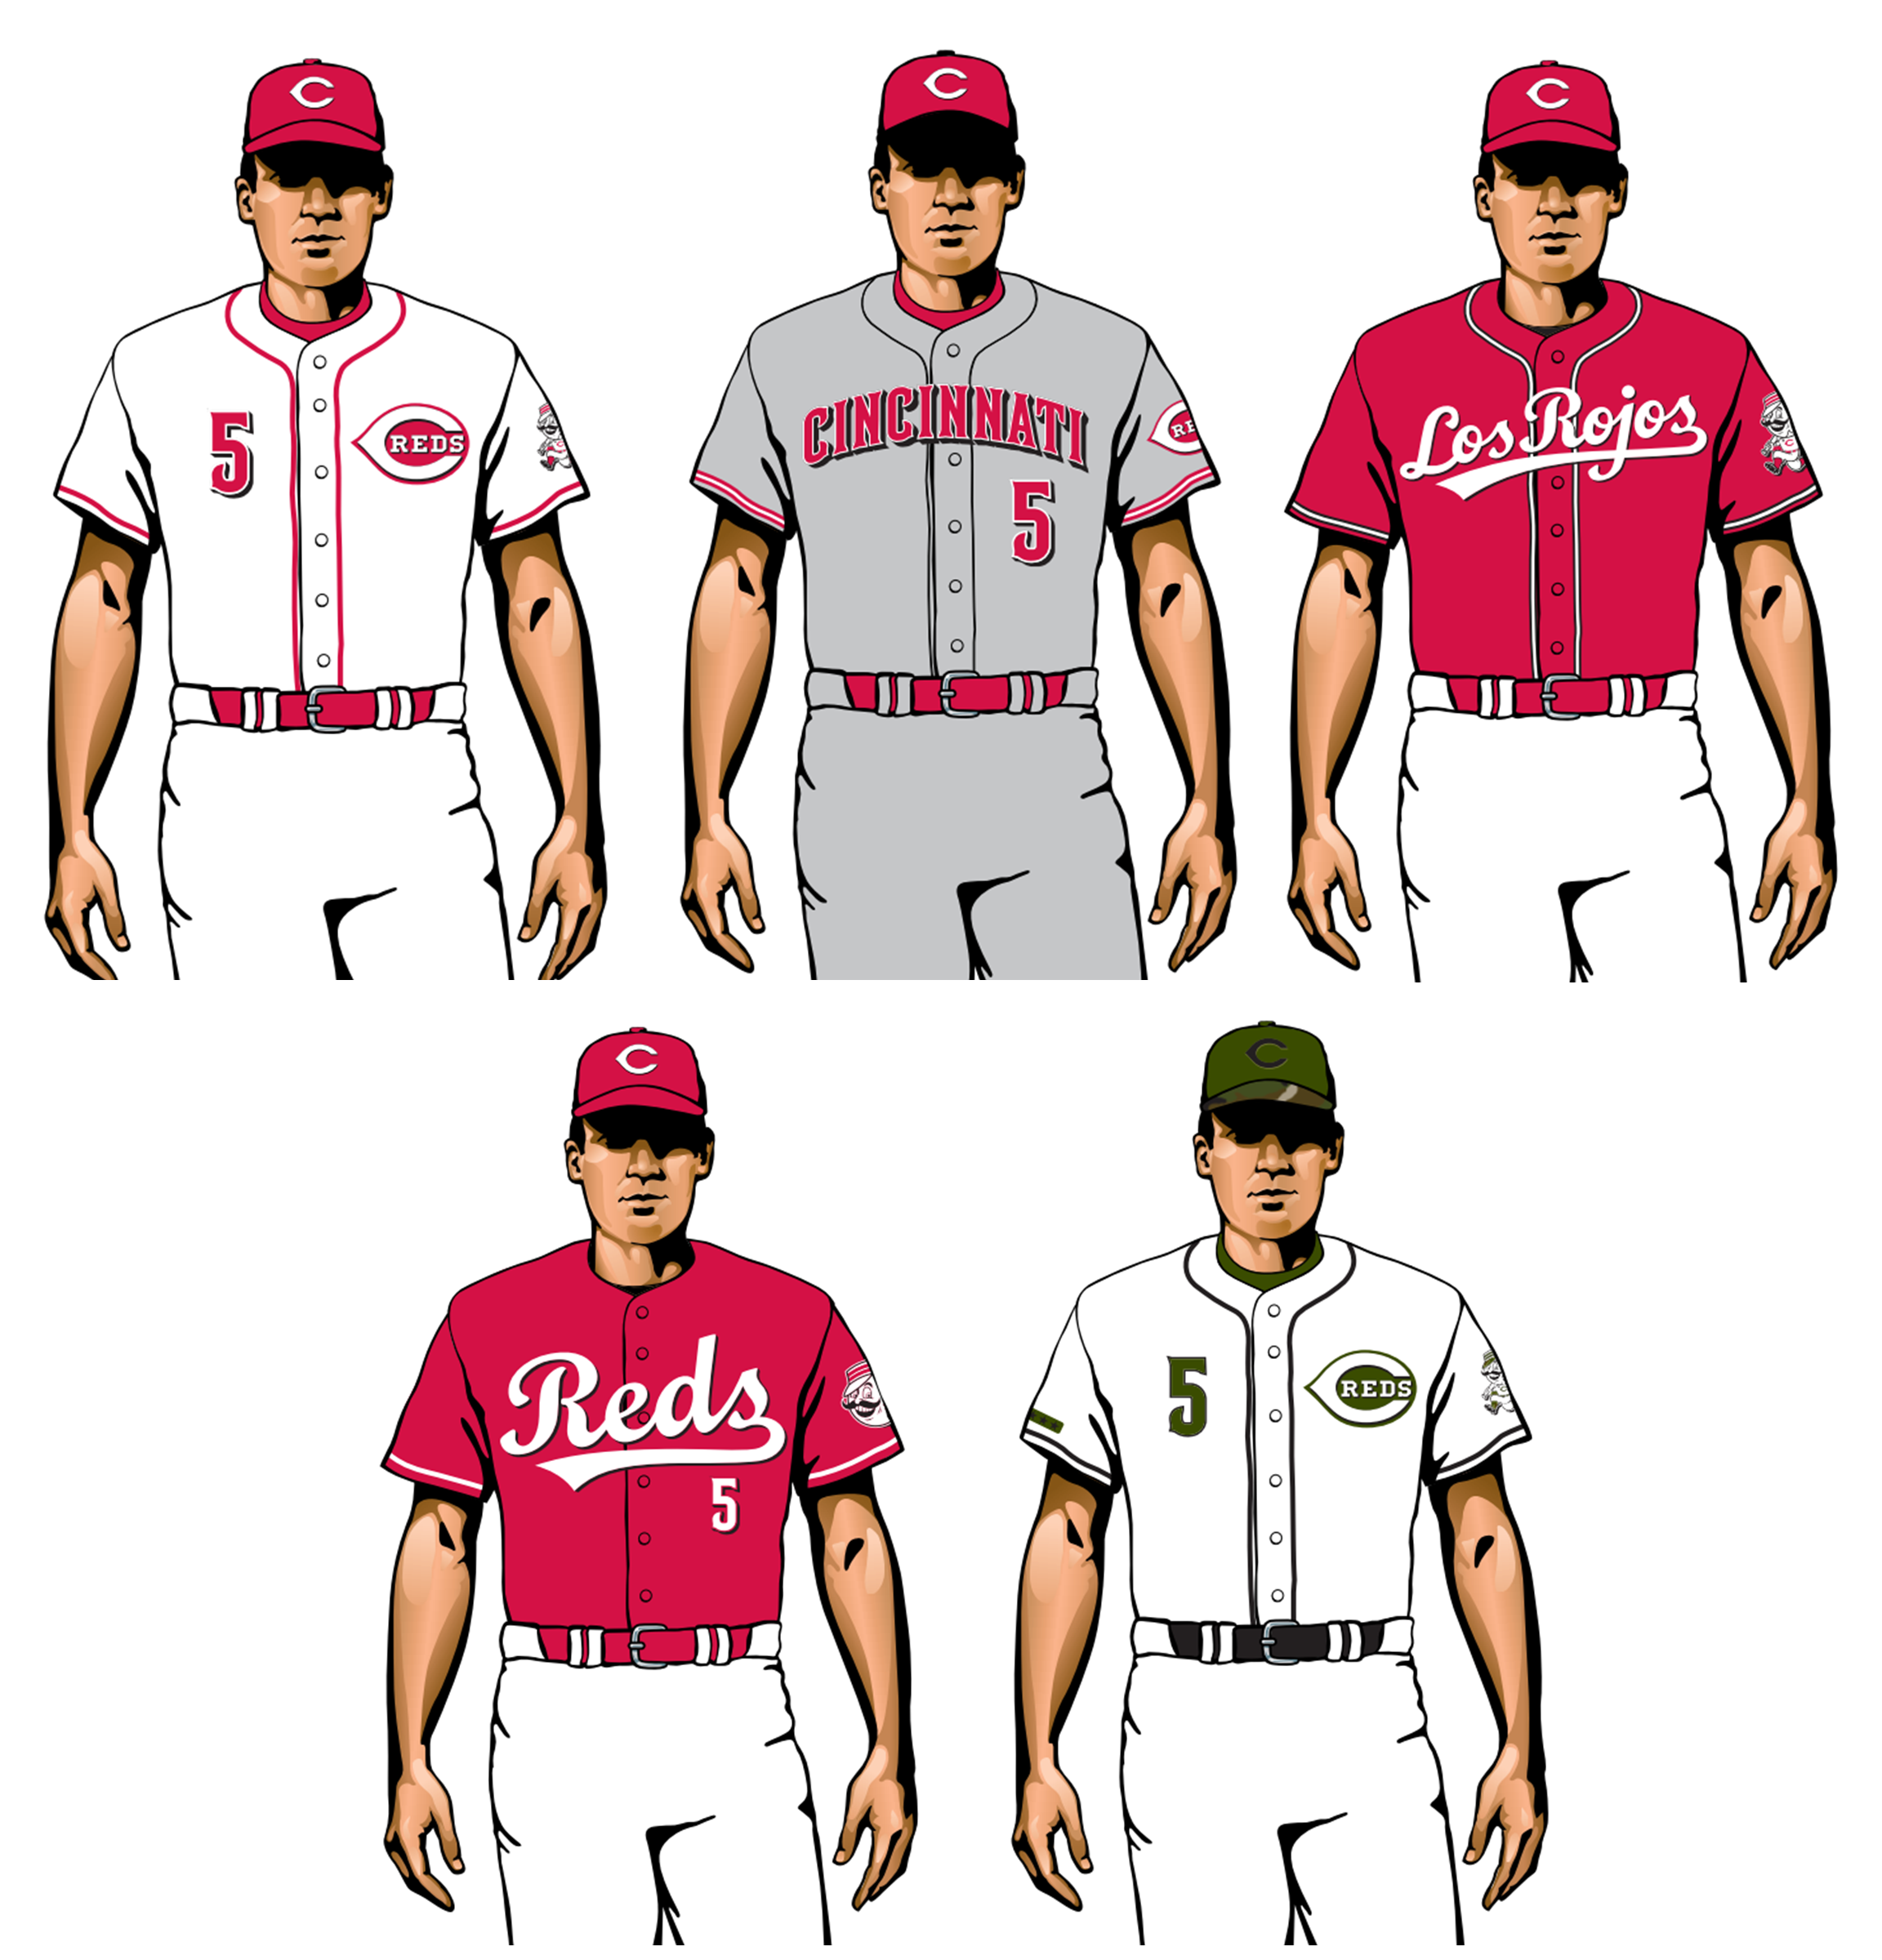 MLB uniforms, ranked: Ranking all 30 teams' uniforms ahead of the